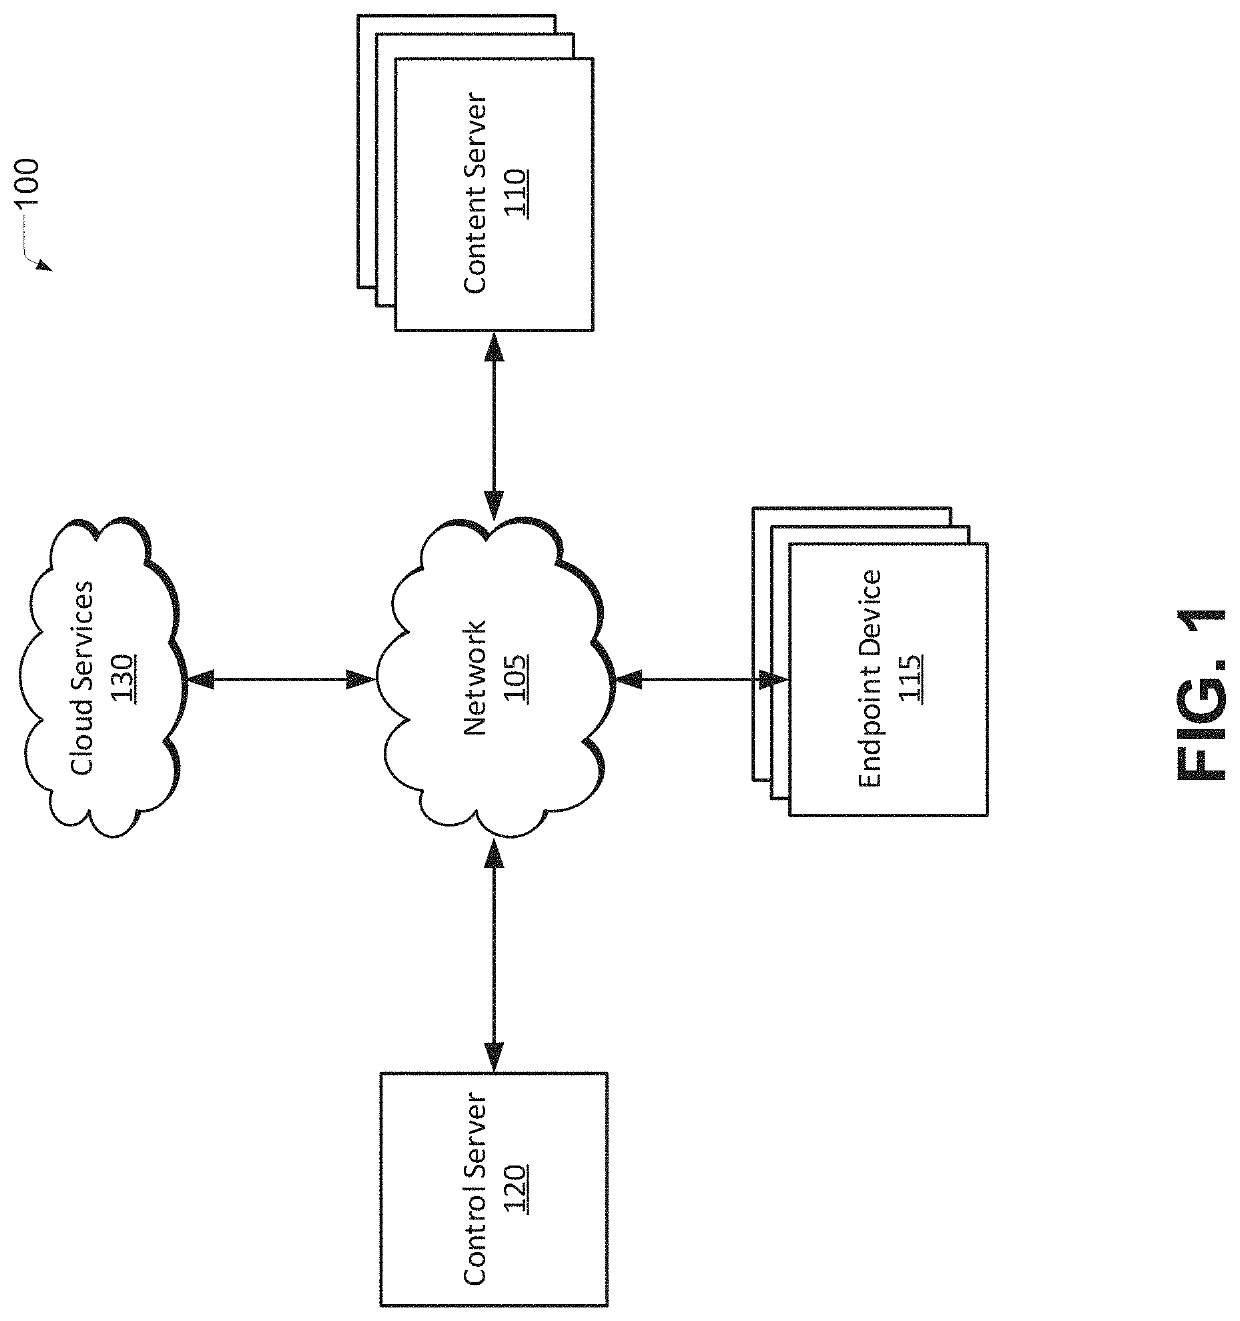 Adaptive retrieval of objects from remote storage